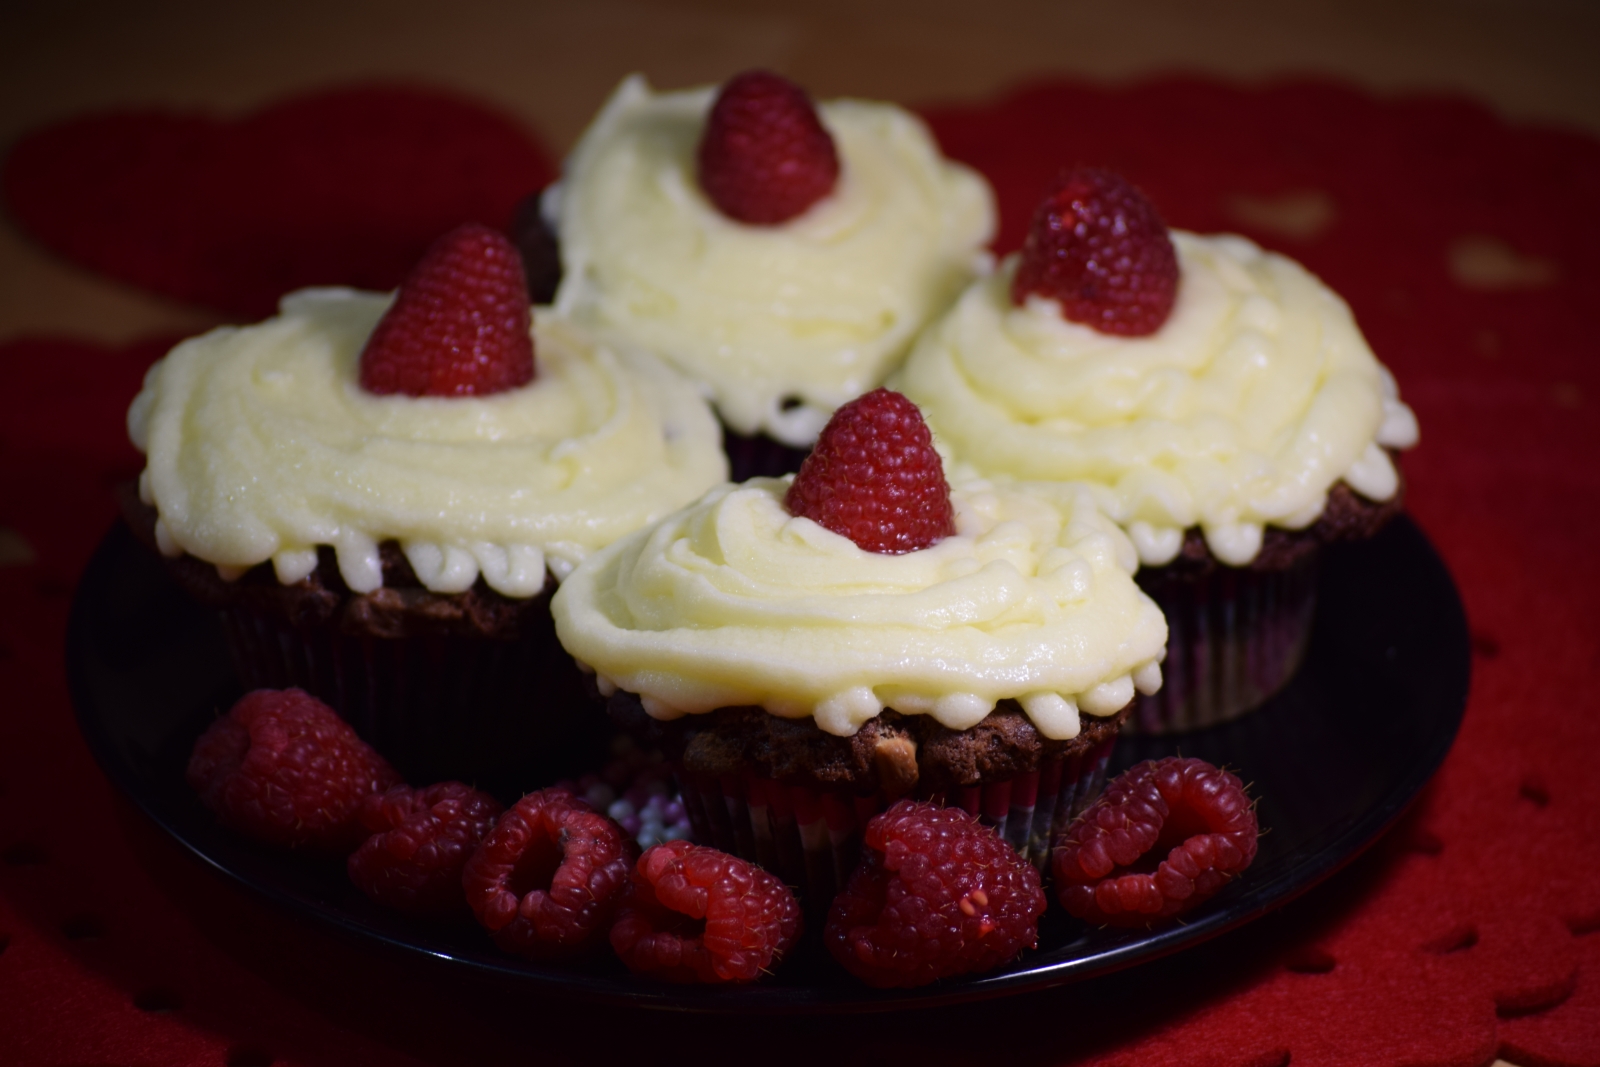 Eggless Chocolate Cupcakes With Raspberry & Cheese Frosting